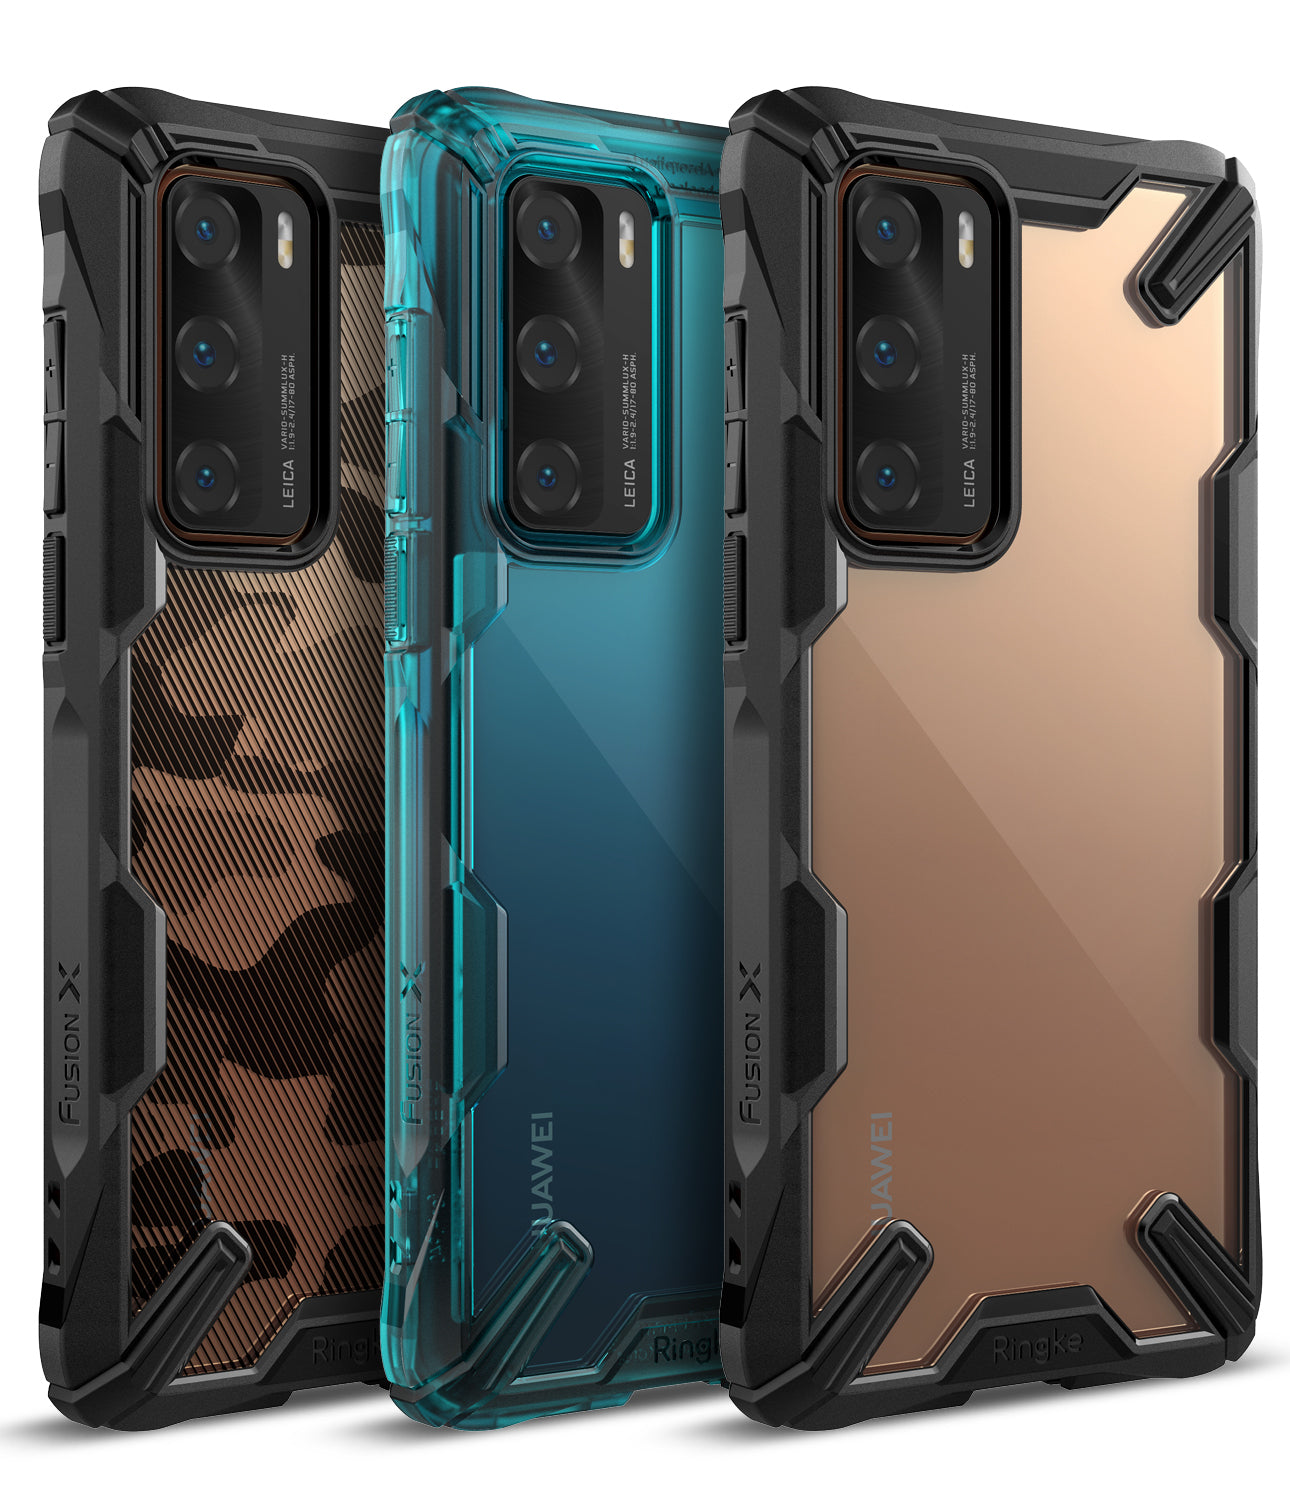 ringke fusion-x designed for huawei p40